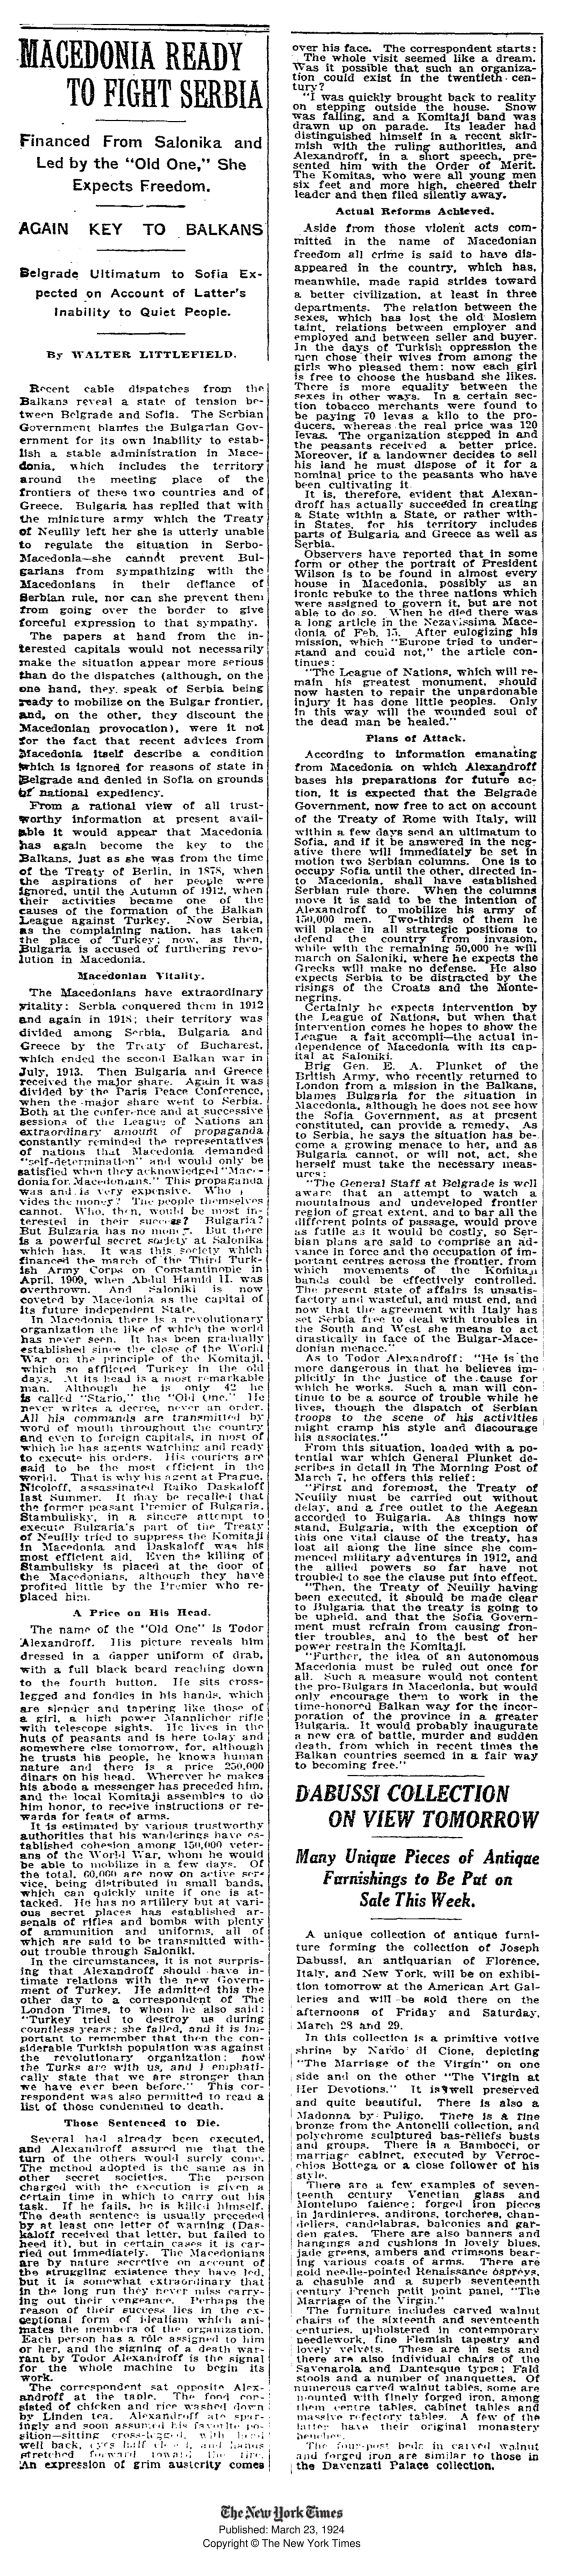 1924.03.23_The New York Times - Macedonia ready to fight Serbia-01